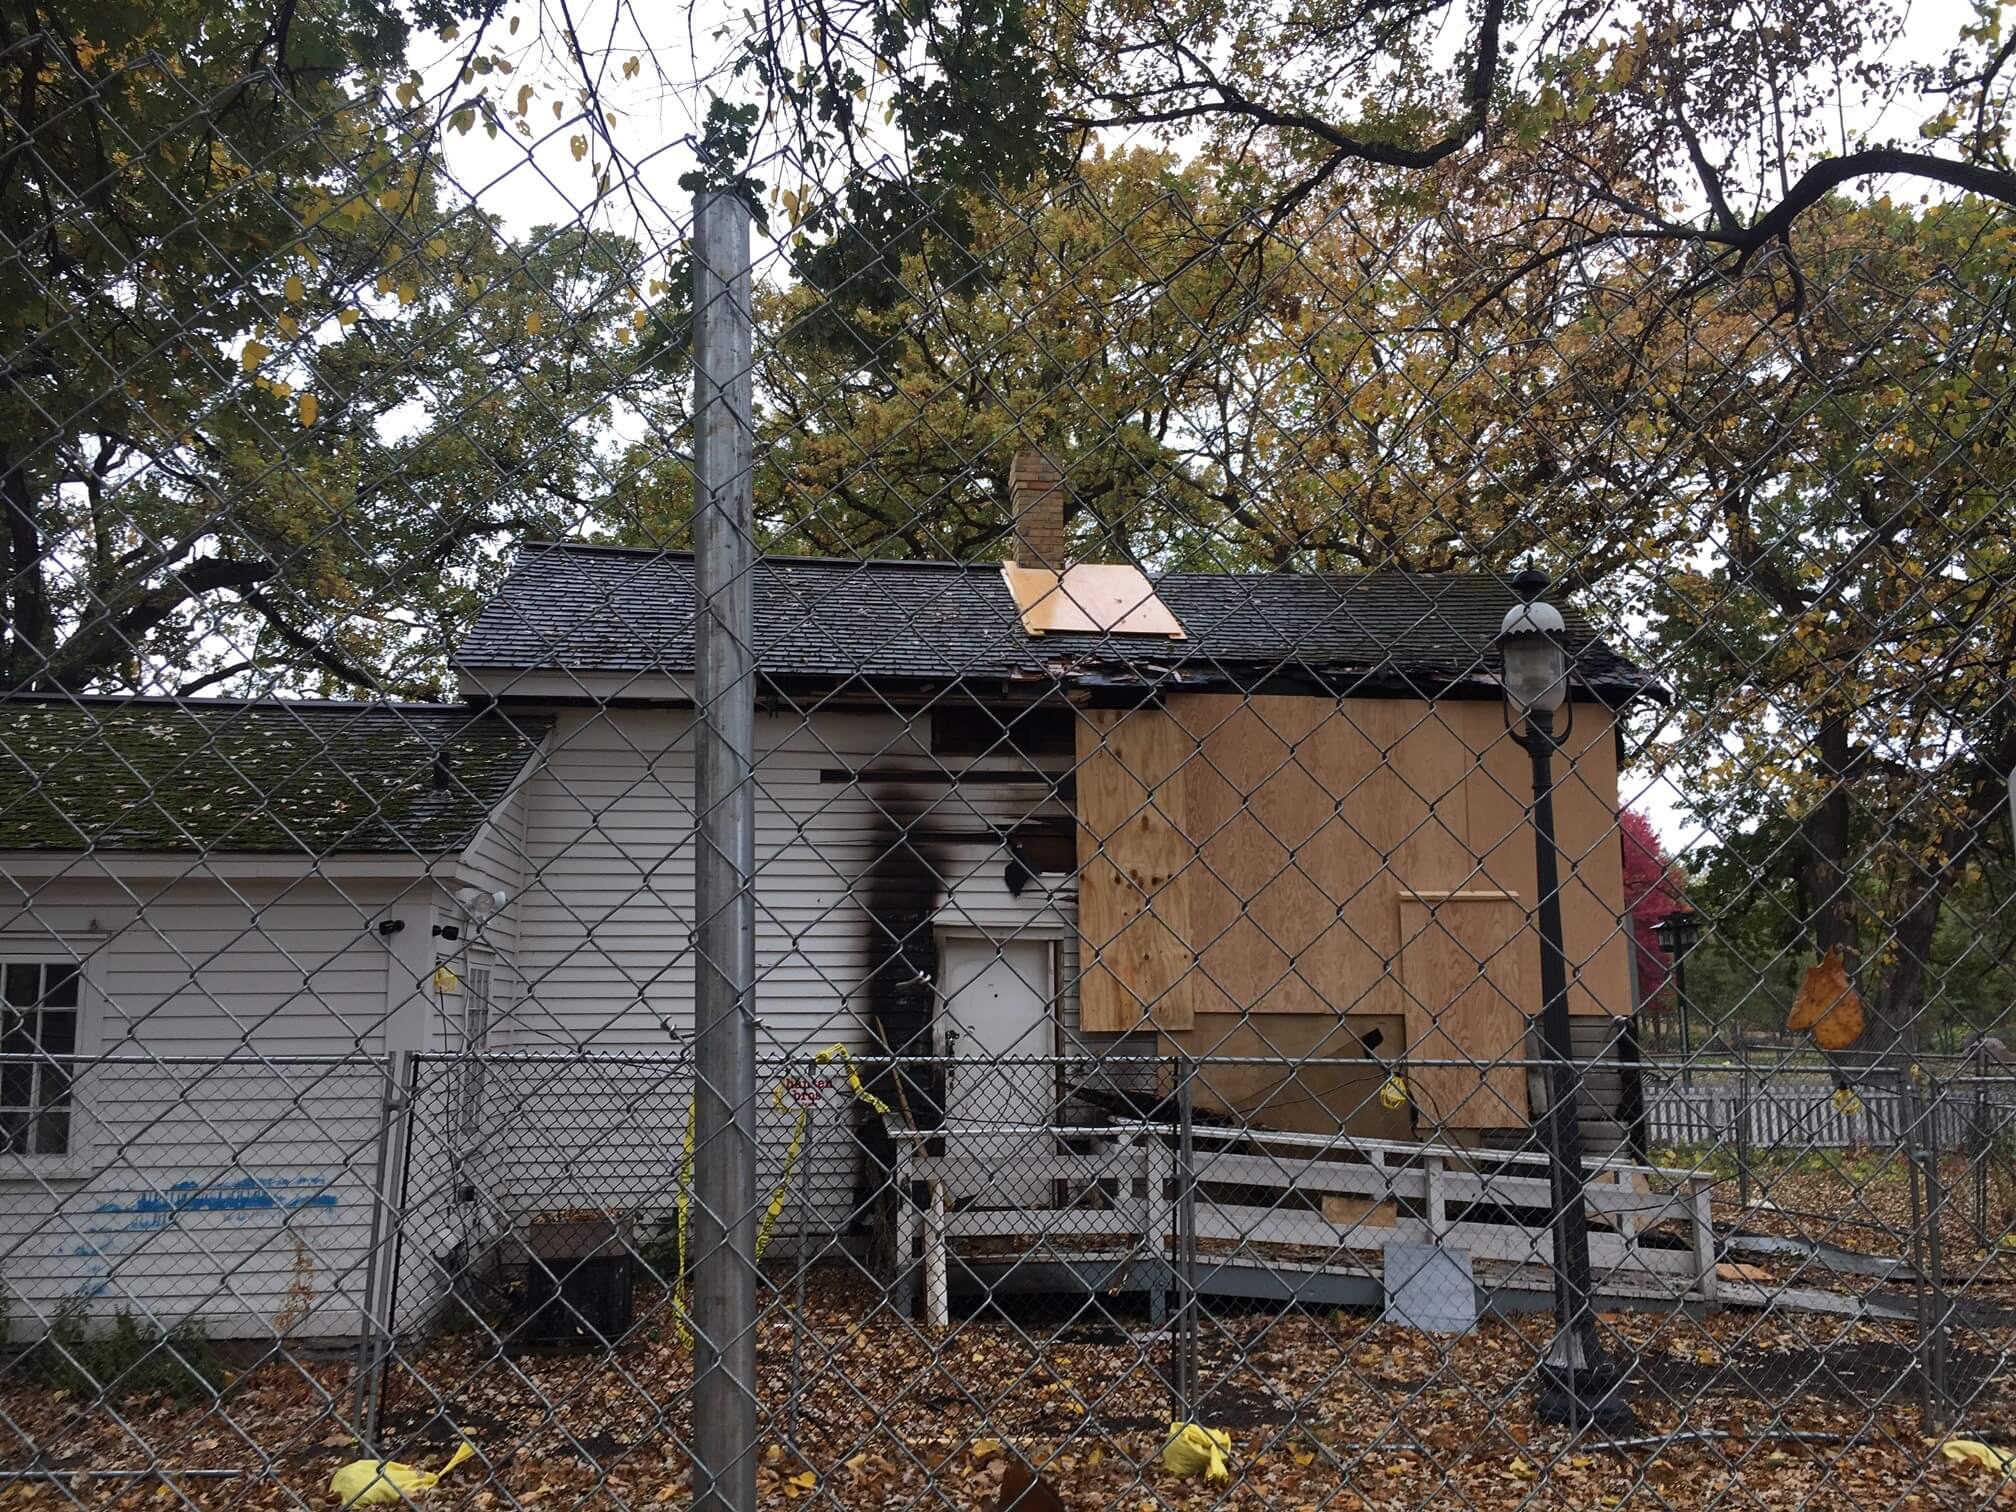 The Stevens House after a suspected arson, boarded up behind two chain link fences